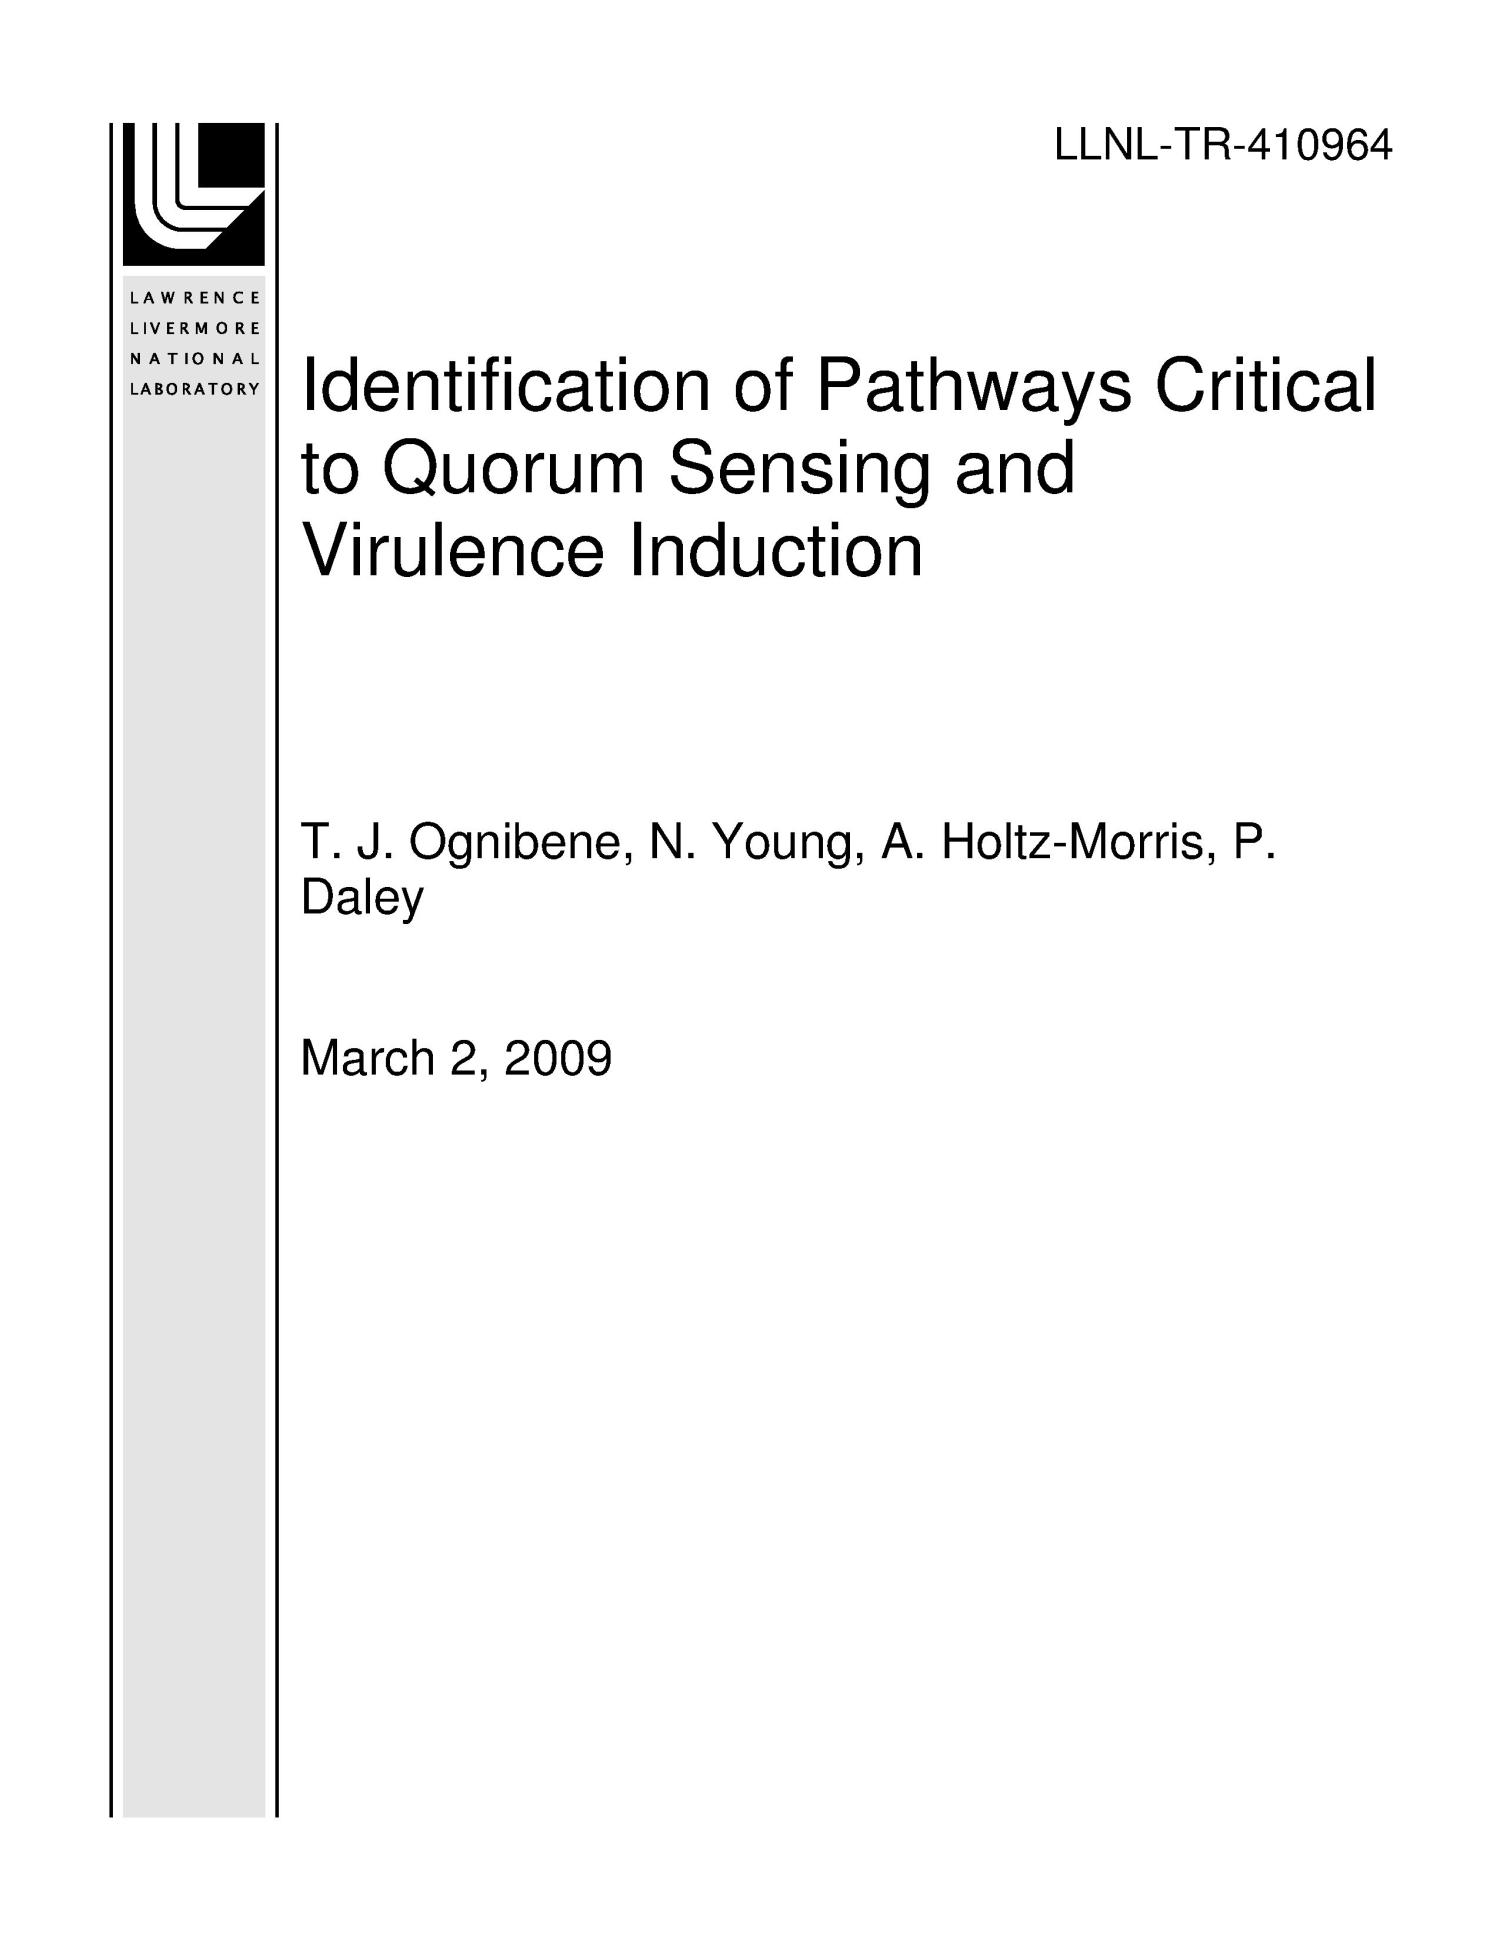 Identification of Pathways Critical to Quorum Sensing and Virulence Induction
                                                
                                                    [Sequence #]: 1 of 13
                                                